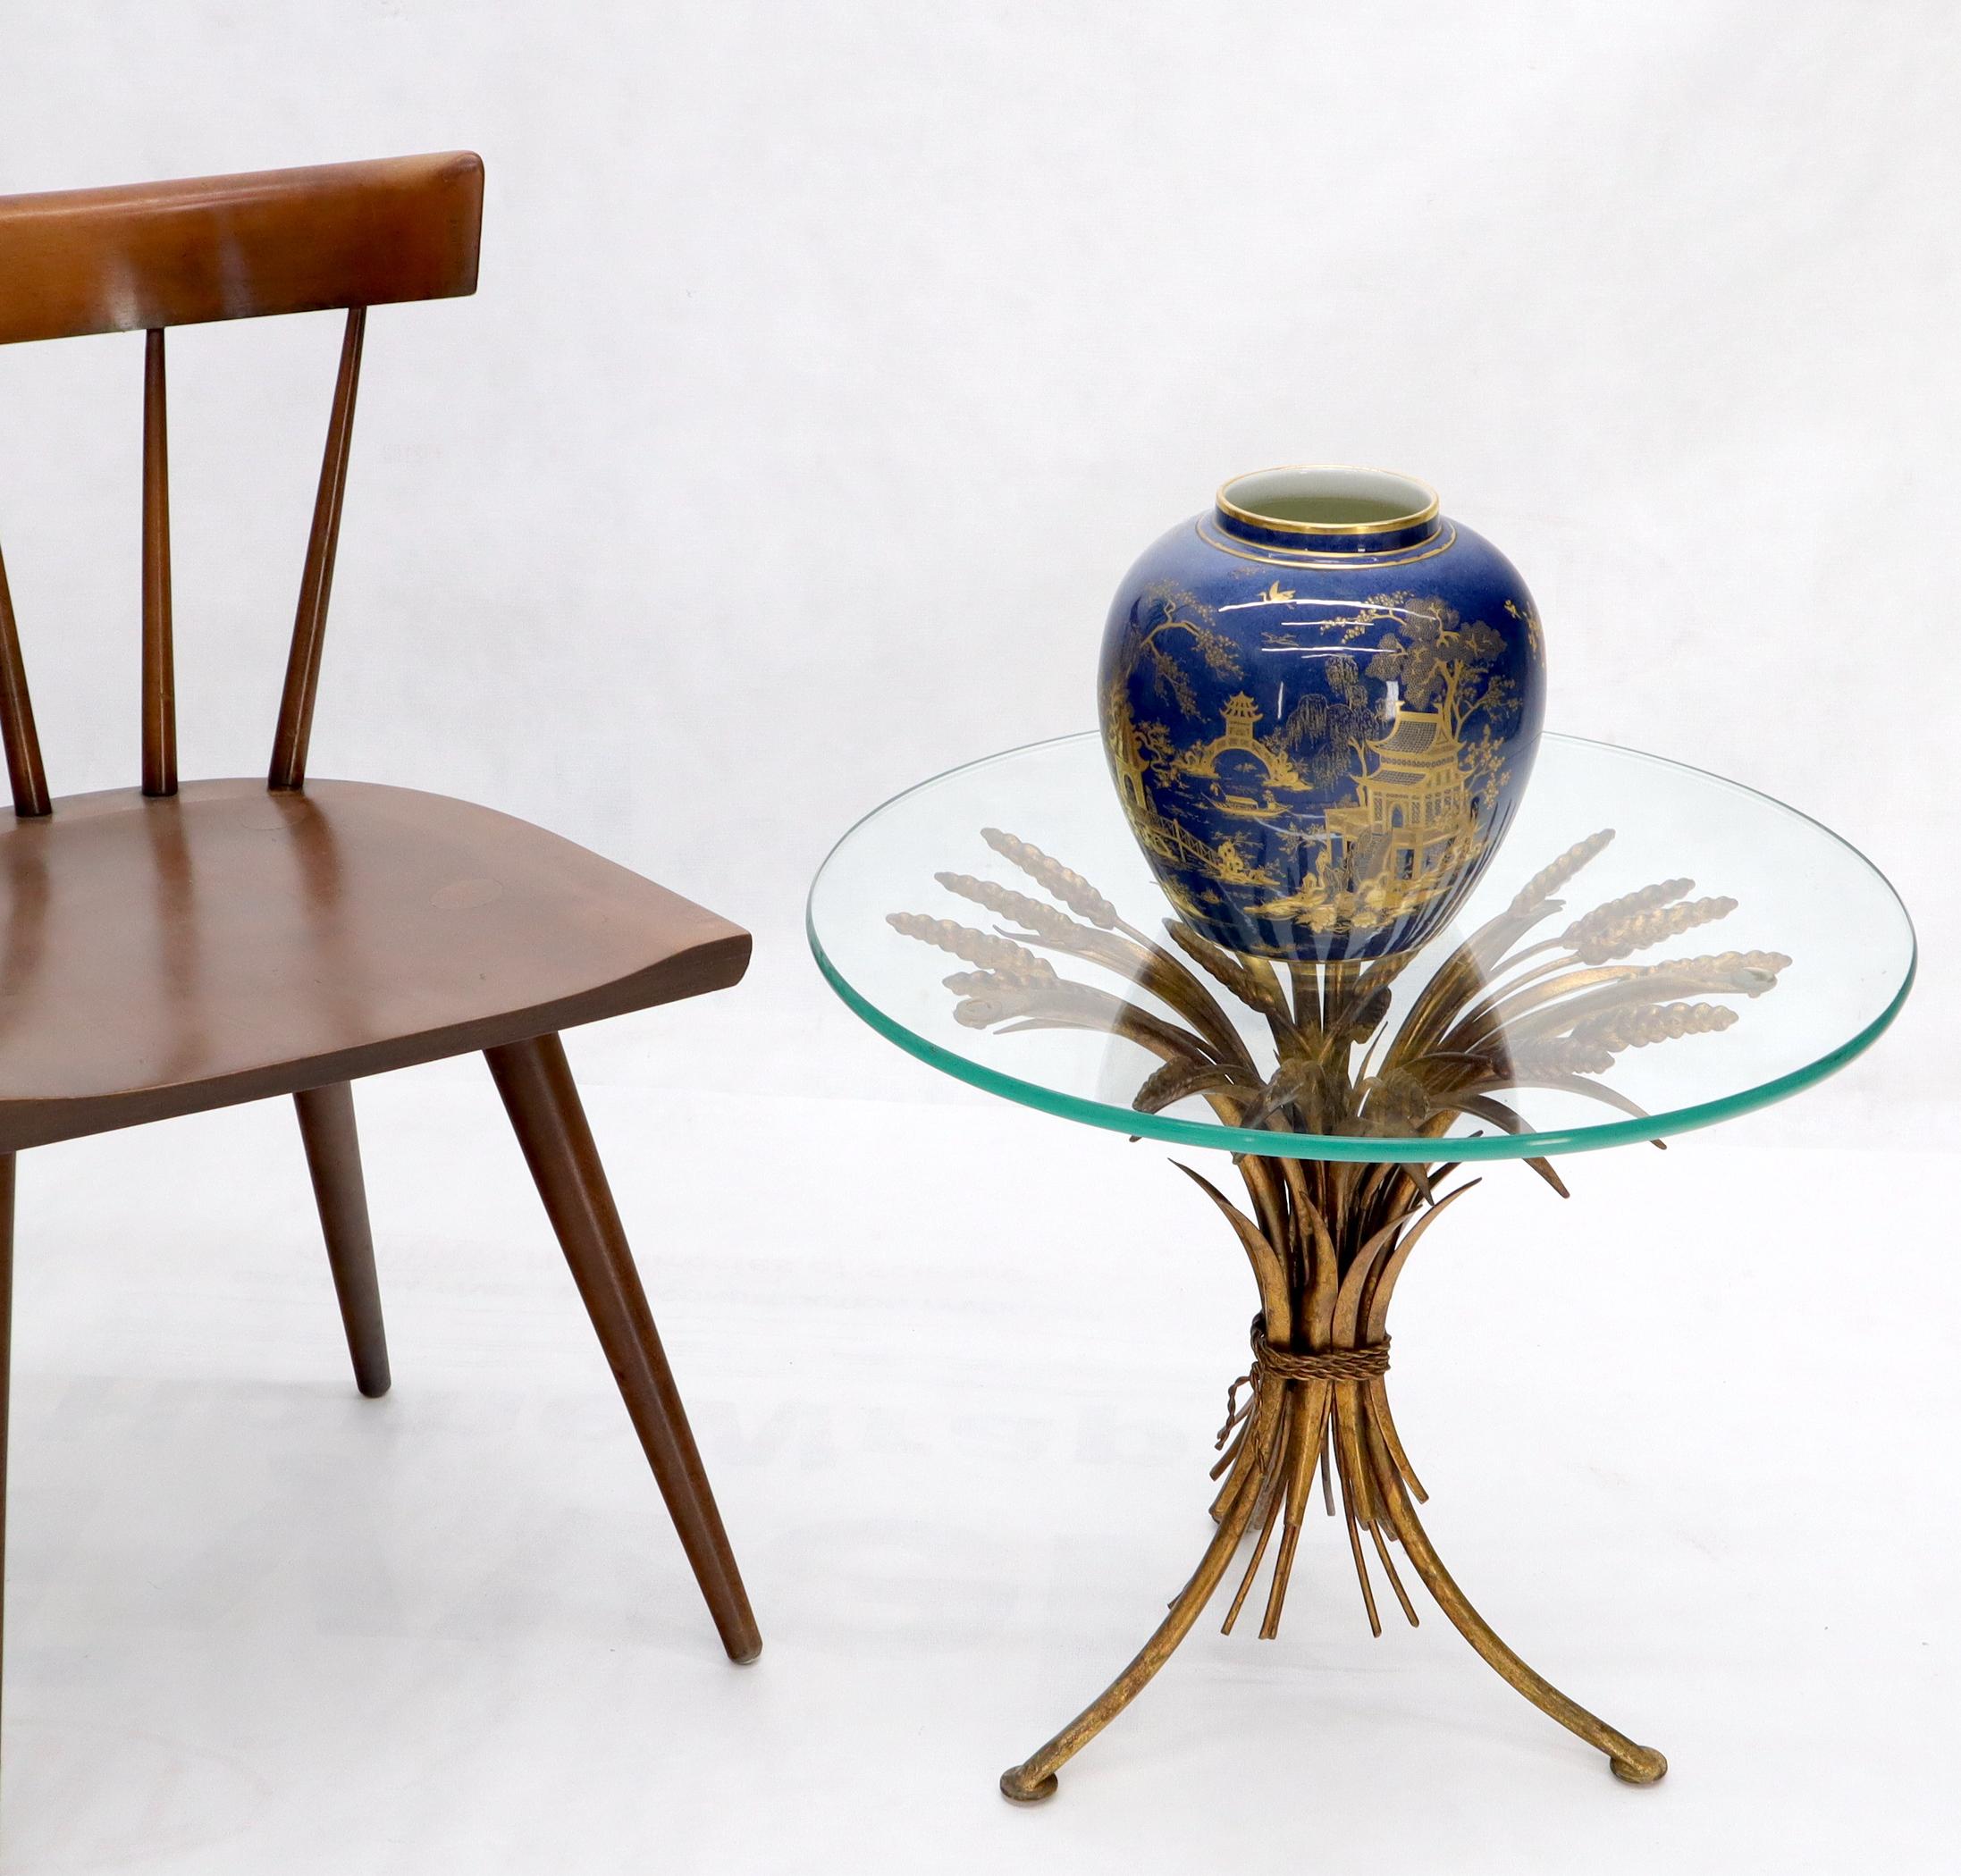 Gold Gild Metal Wheat Sheaf Round Glass Top Side Occasional Table Stand In Good Condition For Sale In Rockaway, NJ